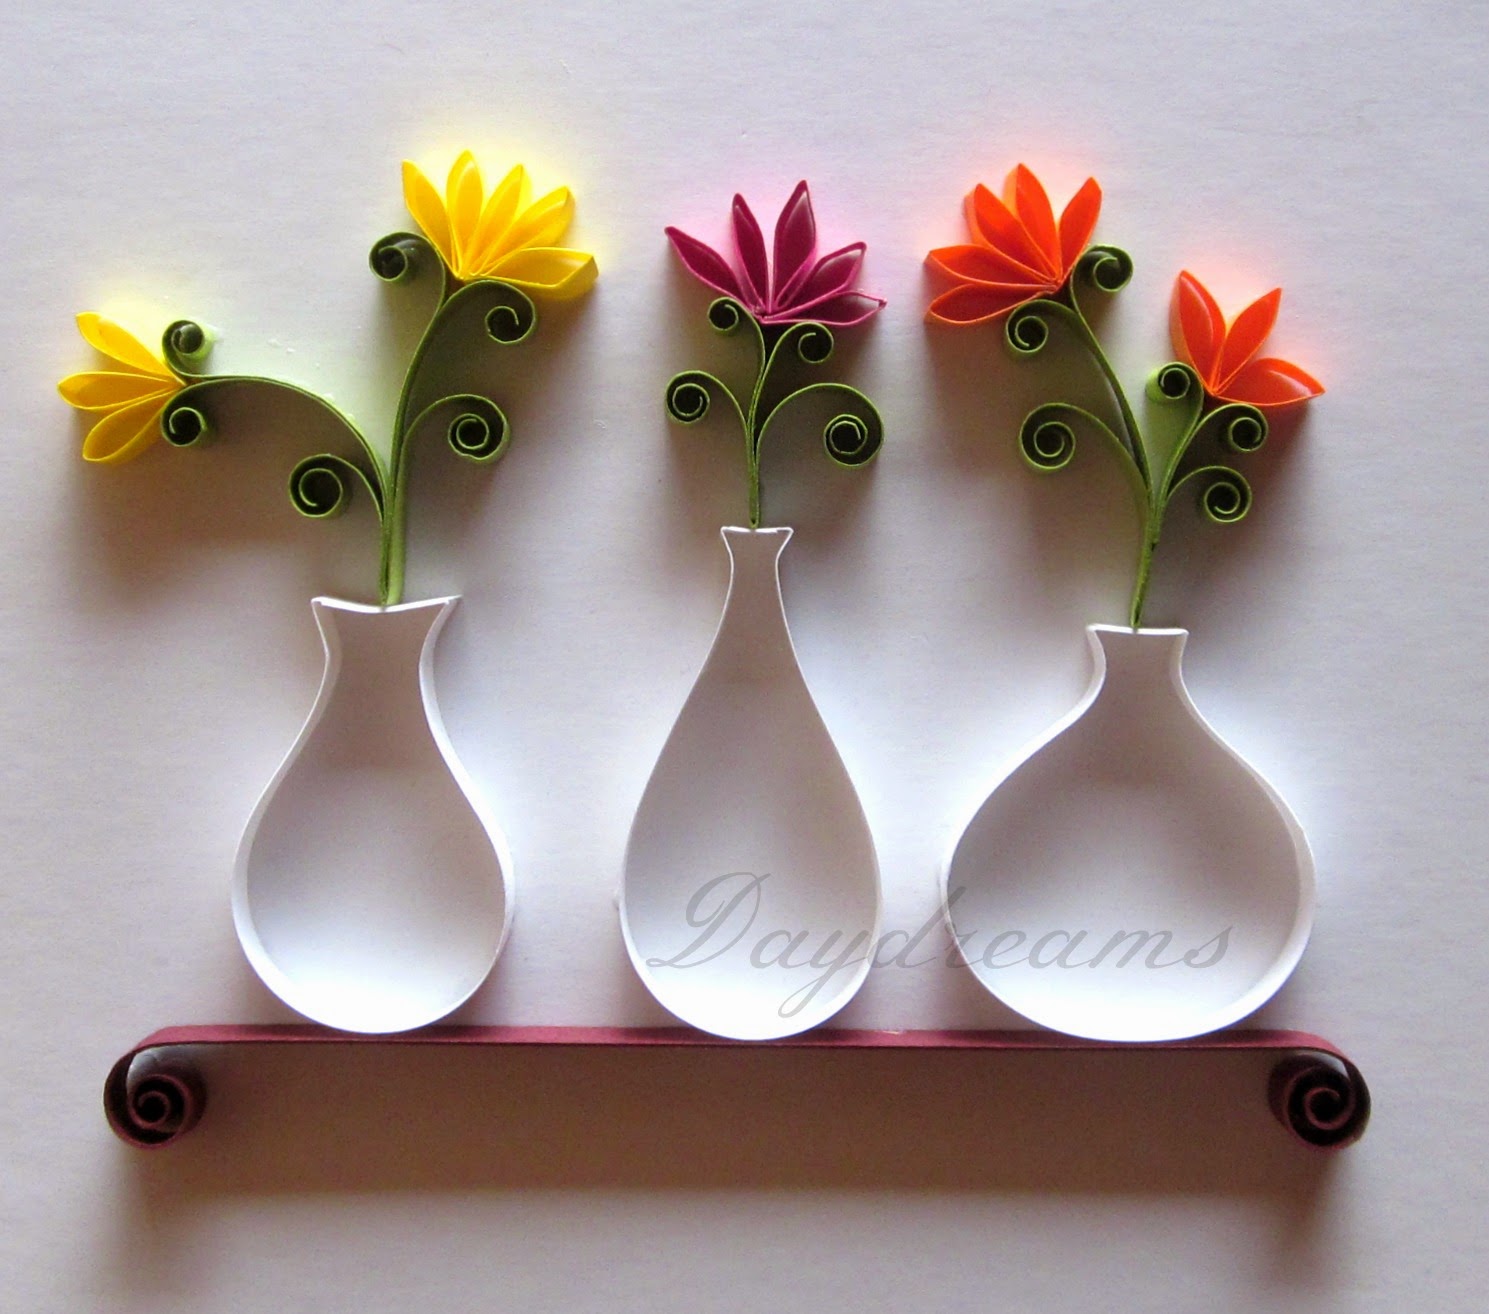 Inna's Creations: DIY quilling tool made from a needle